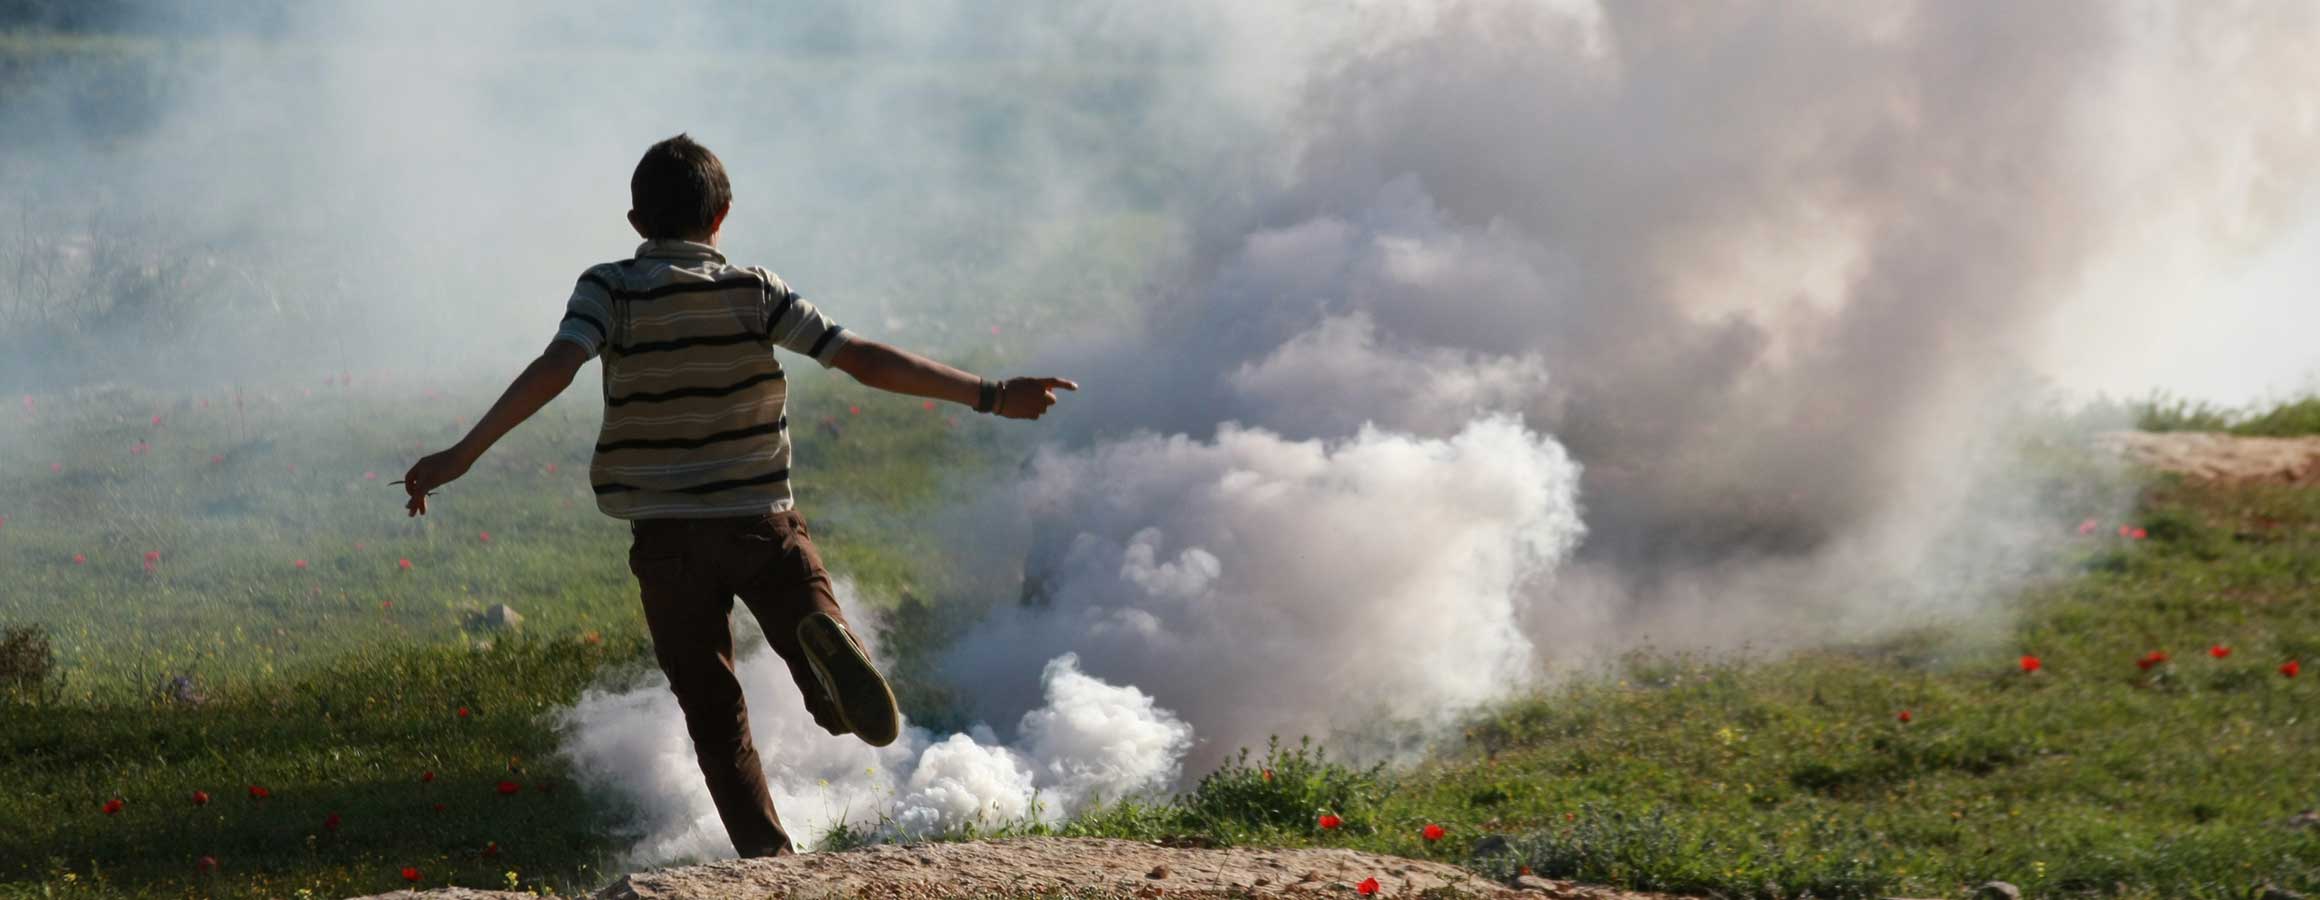 Nabi Saleh Protest. Credit: Fred Jennings. CC BY-NC-SA 2.0, image cropped and resized from original.